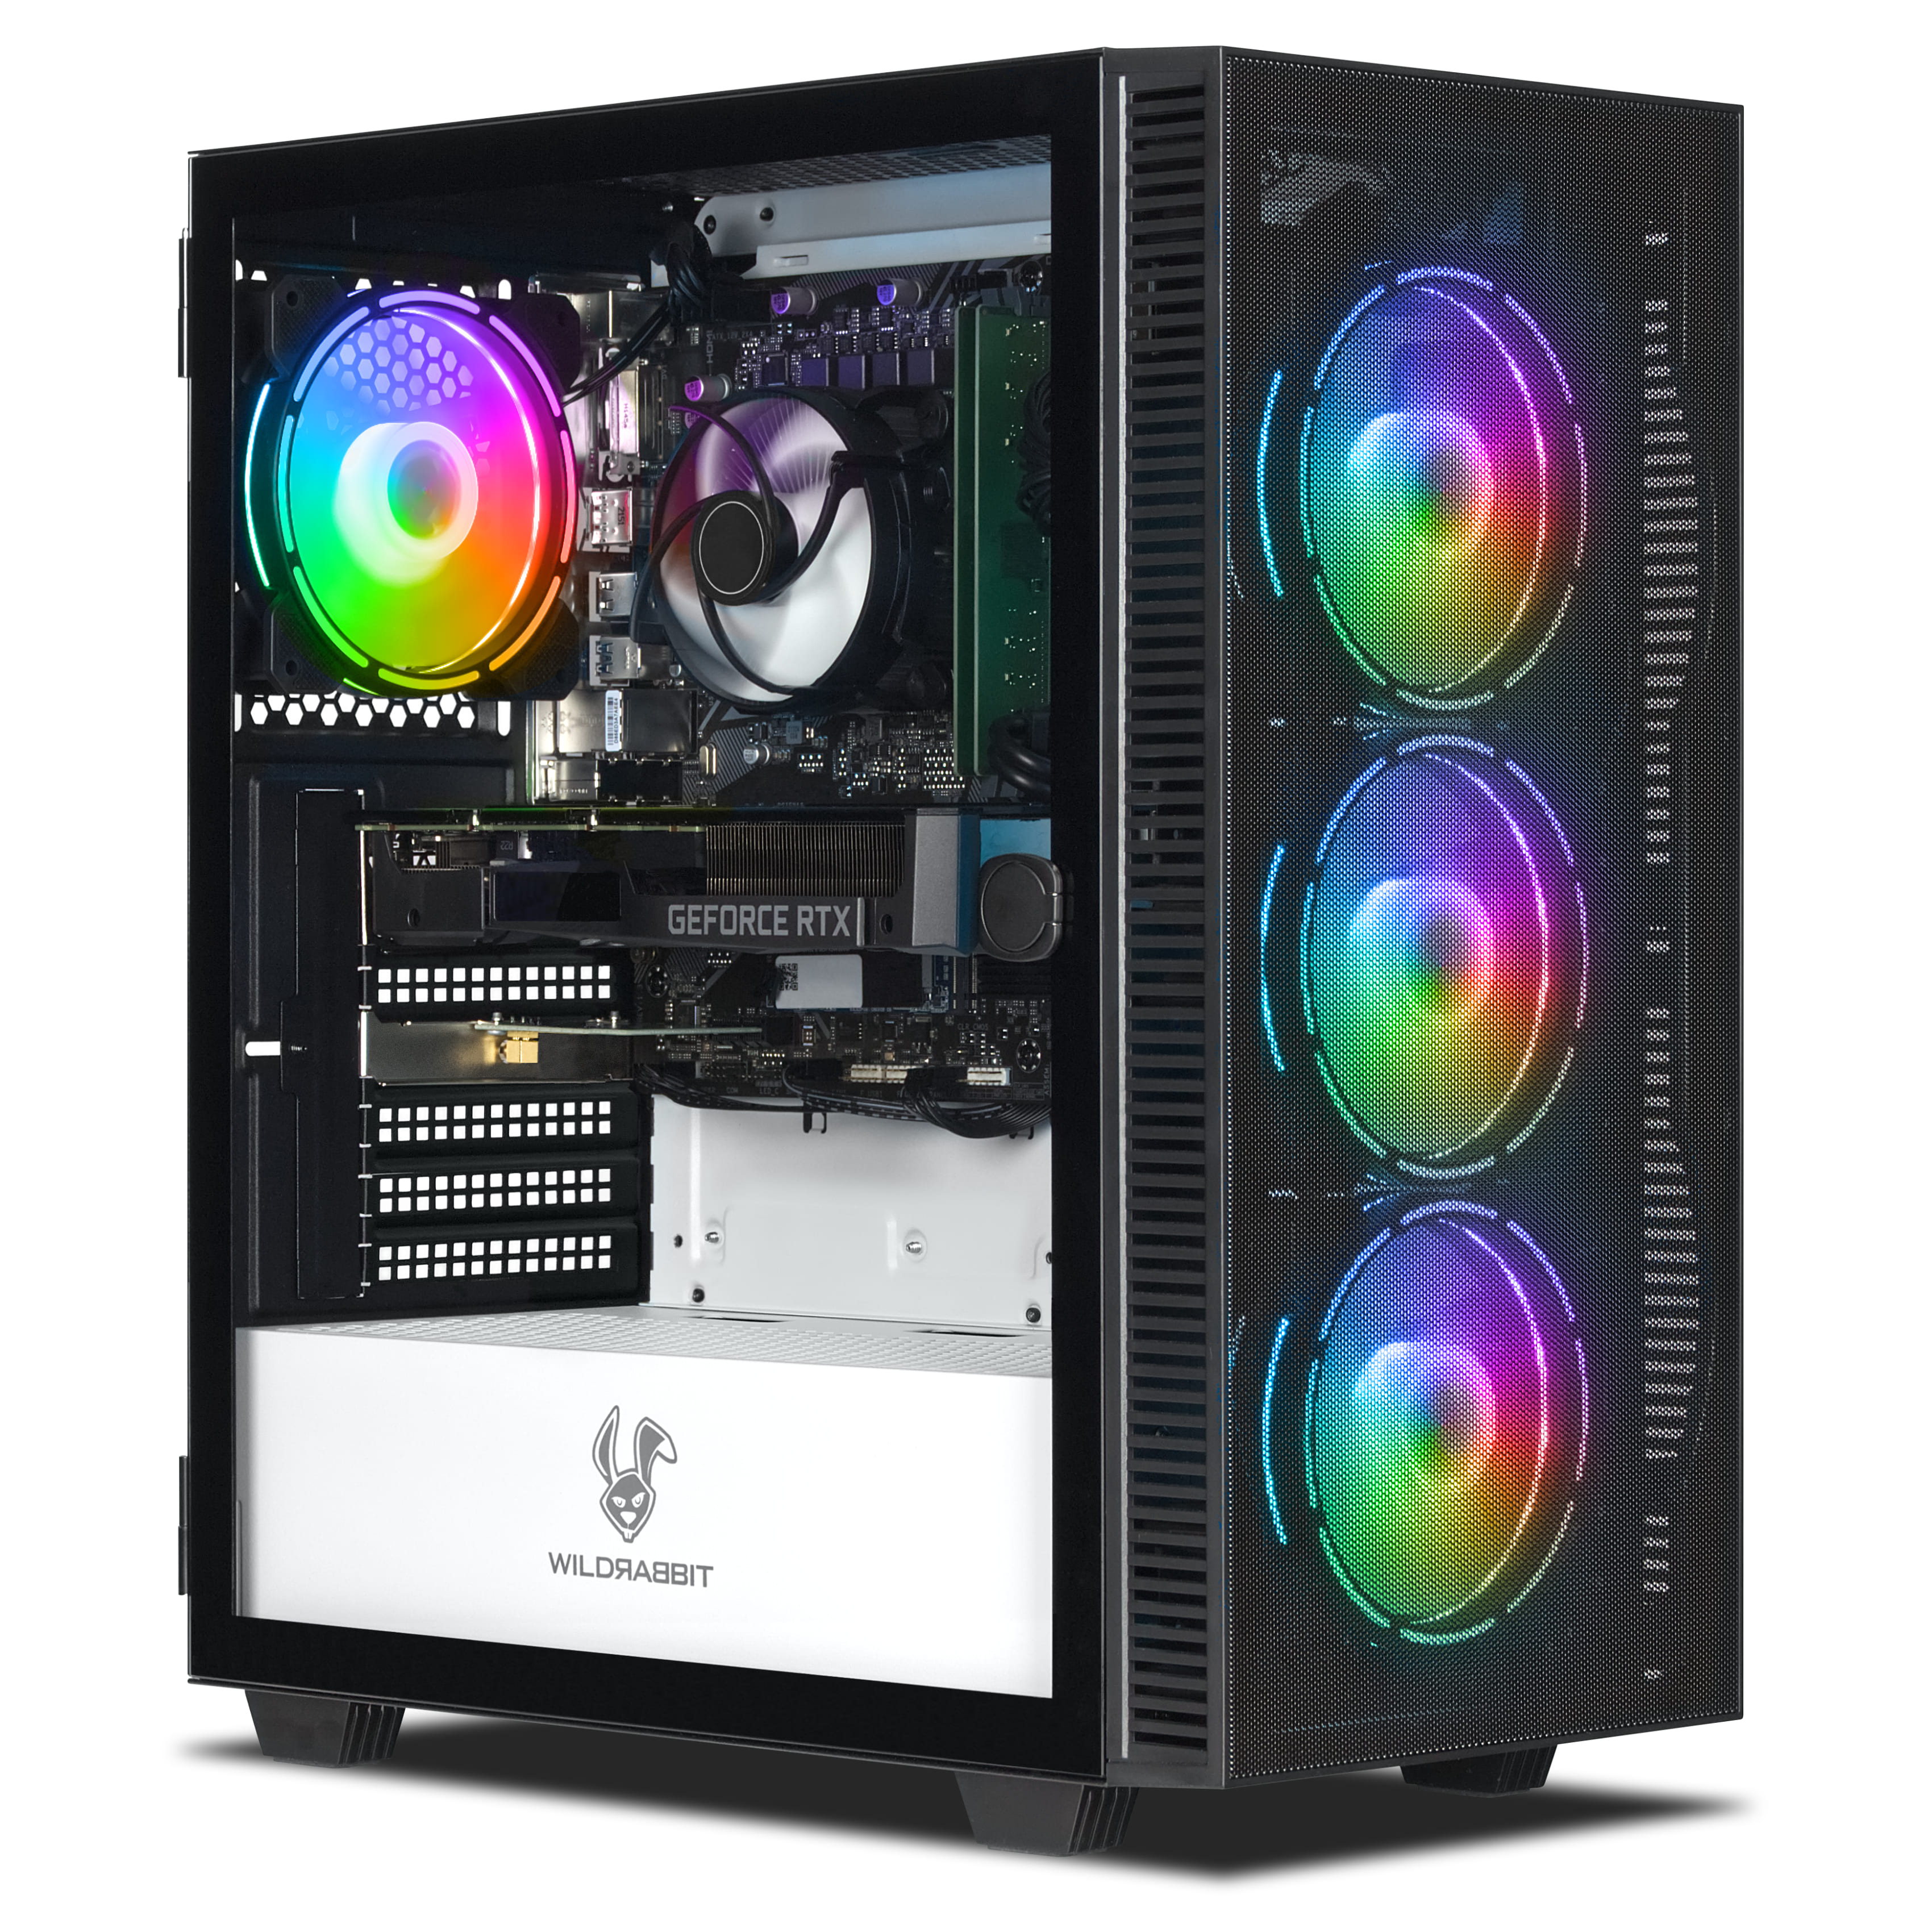 800 Euro PC for gaming or office